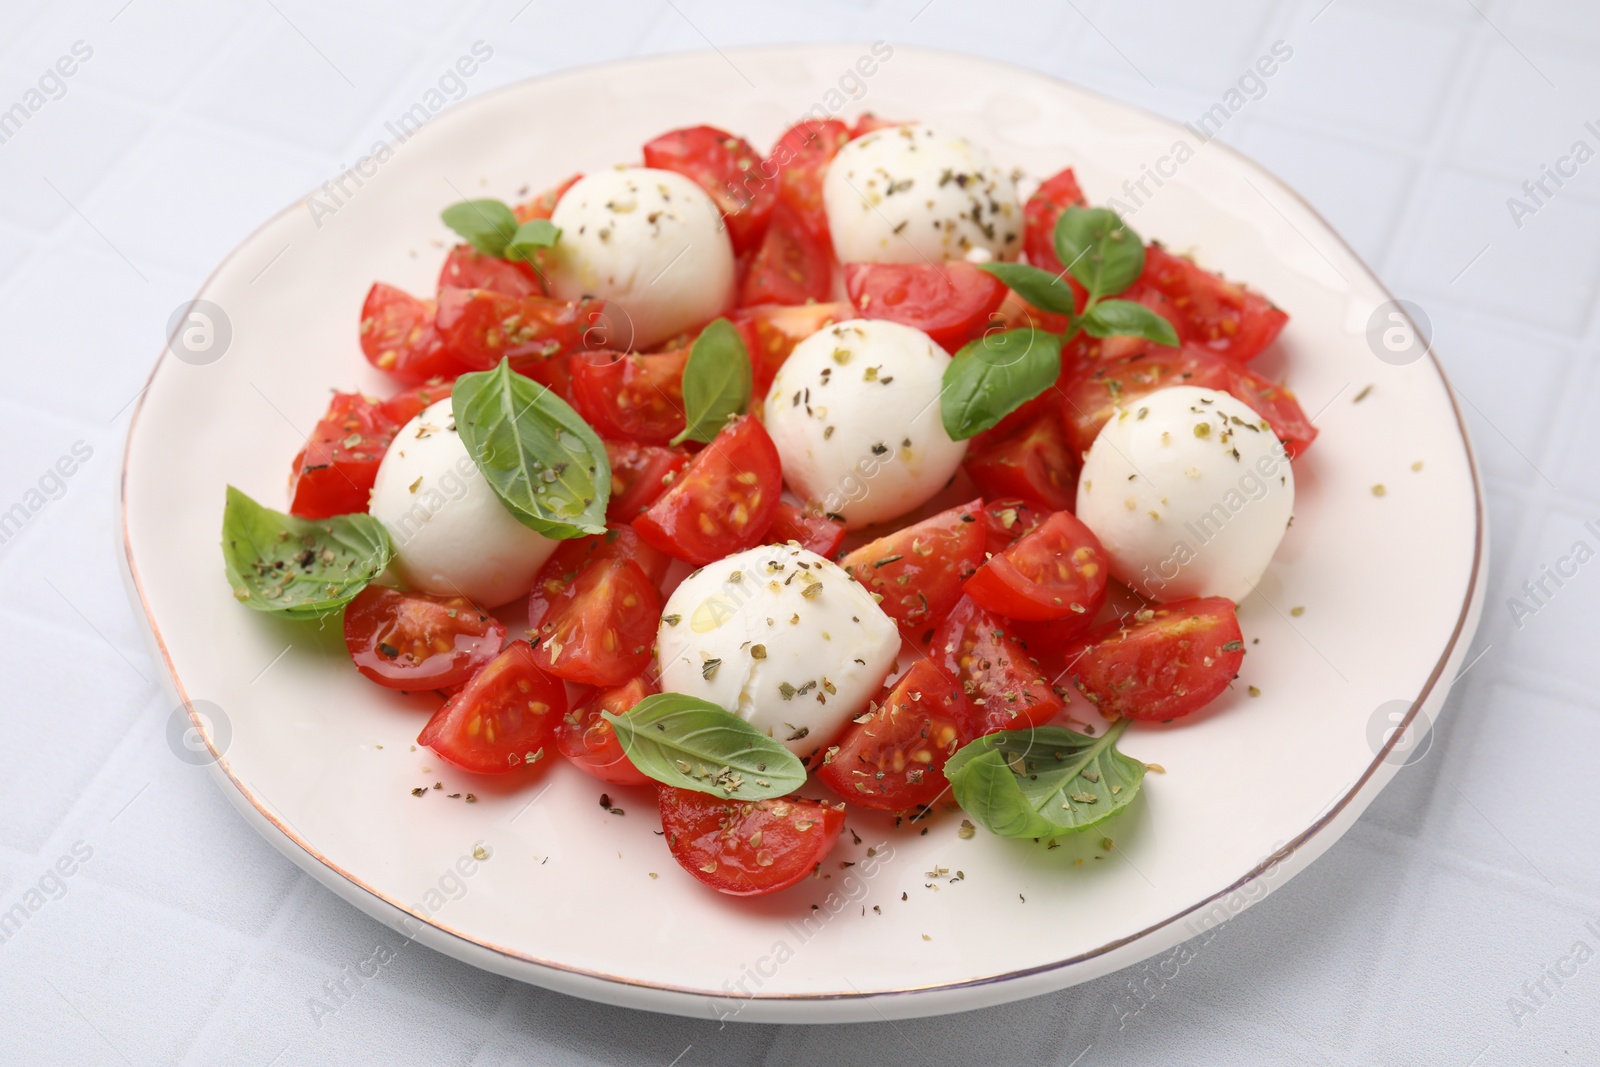 Photo of Tasty salad Caprese with tomatoes, mozzarella balls and basil on white tiled table, closeup